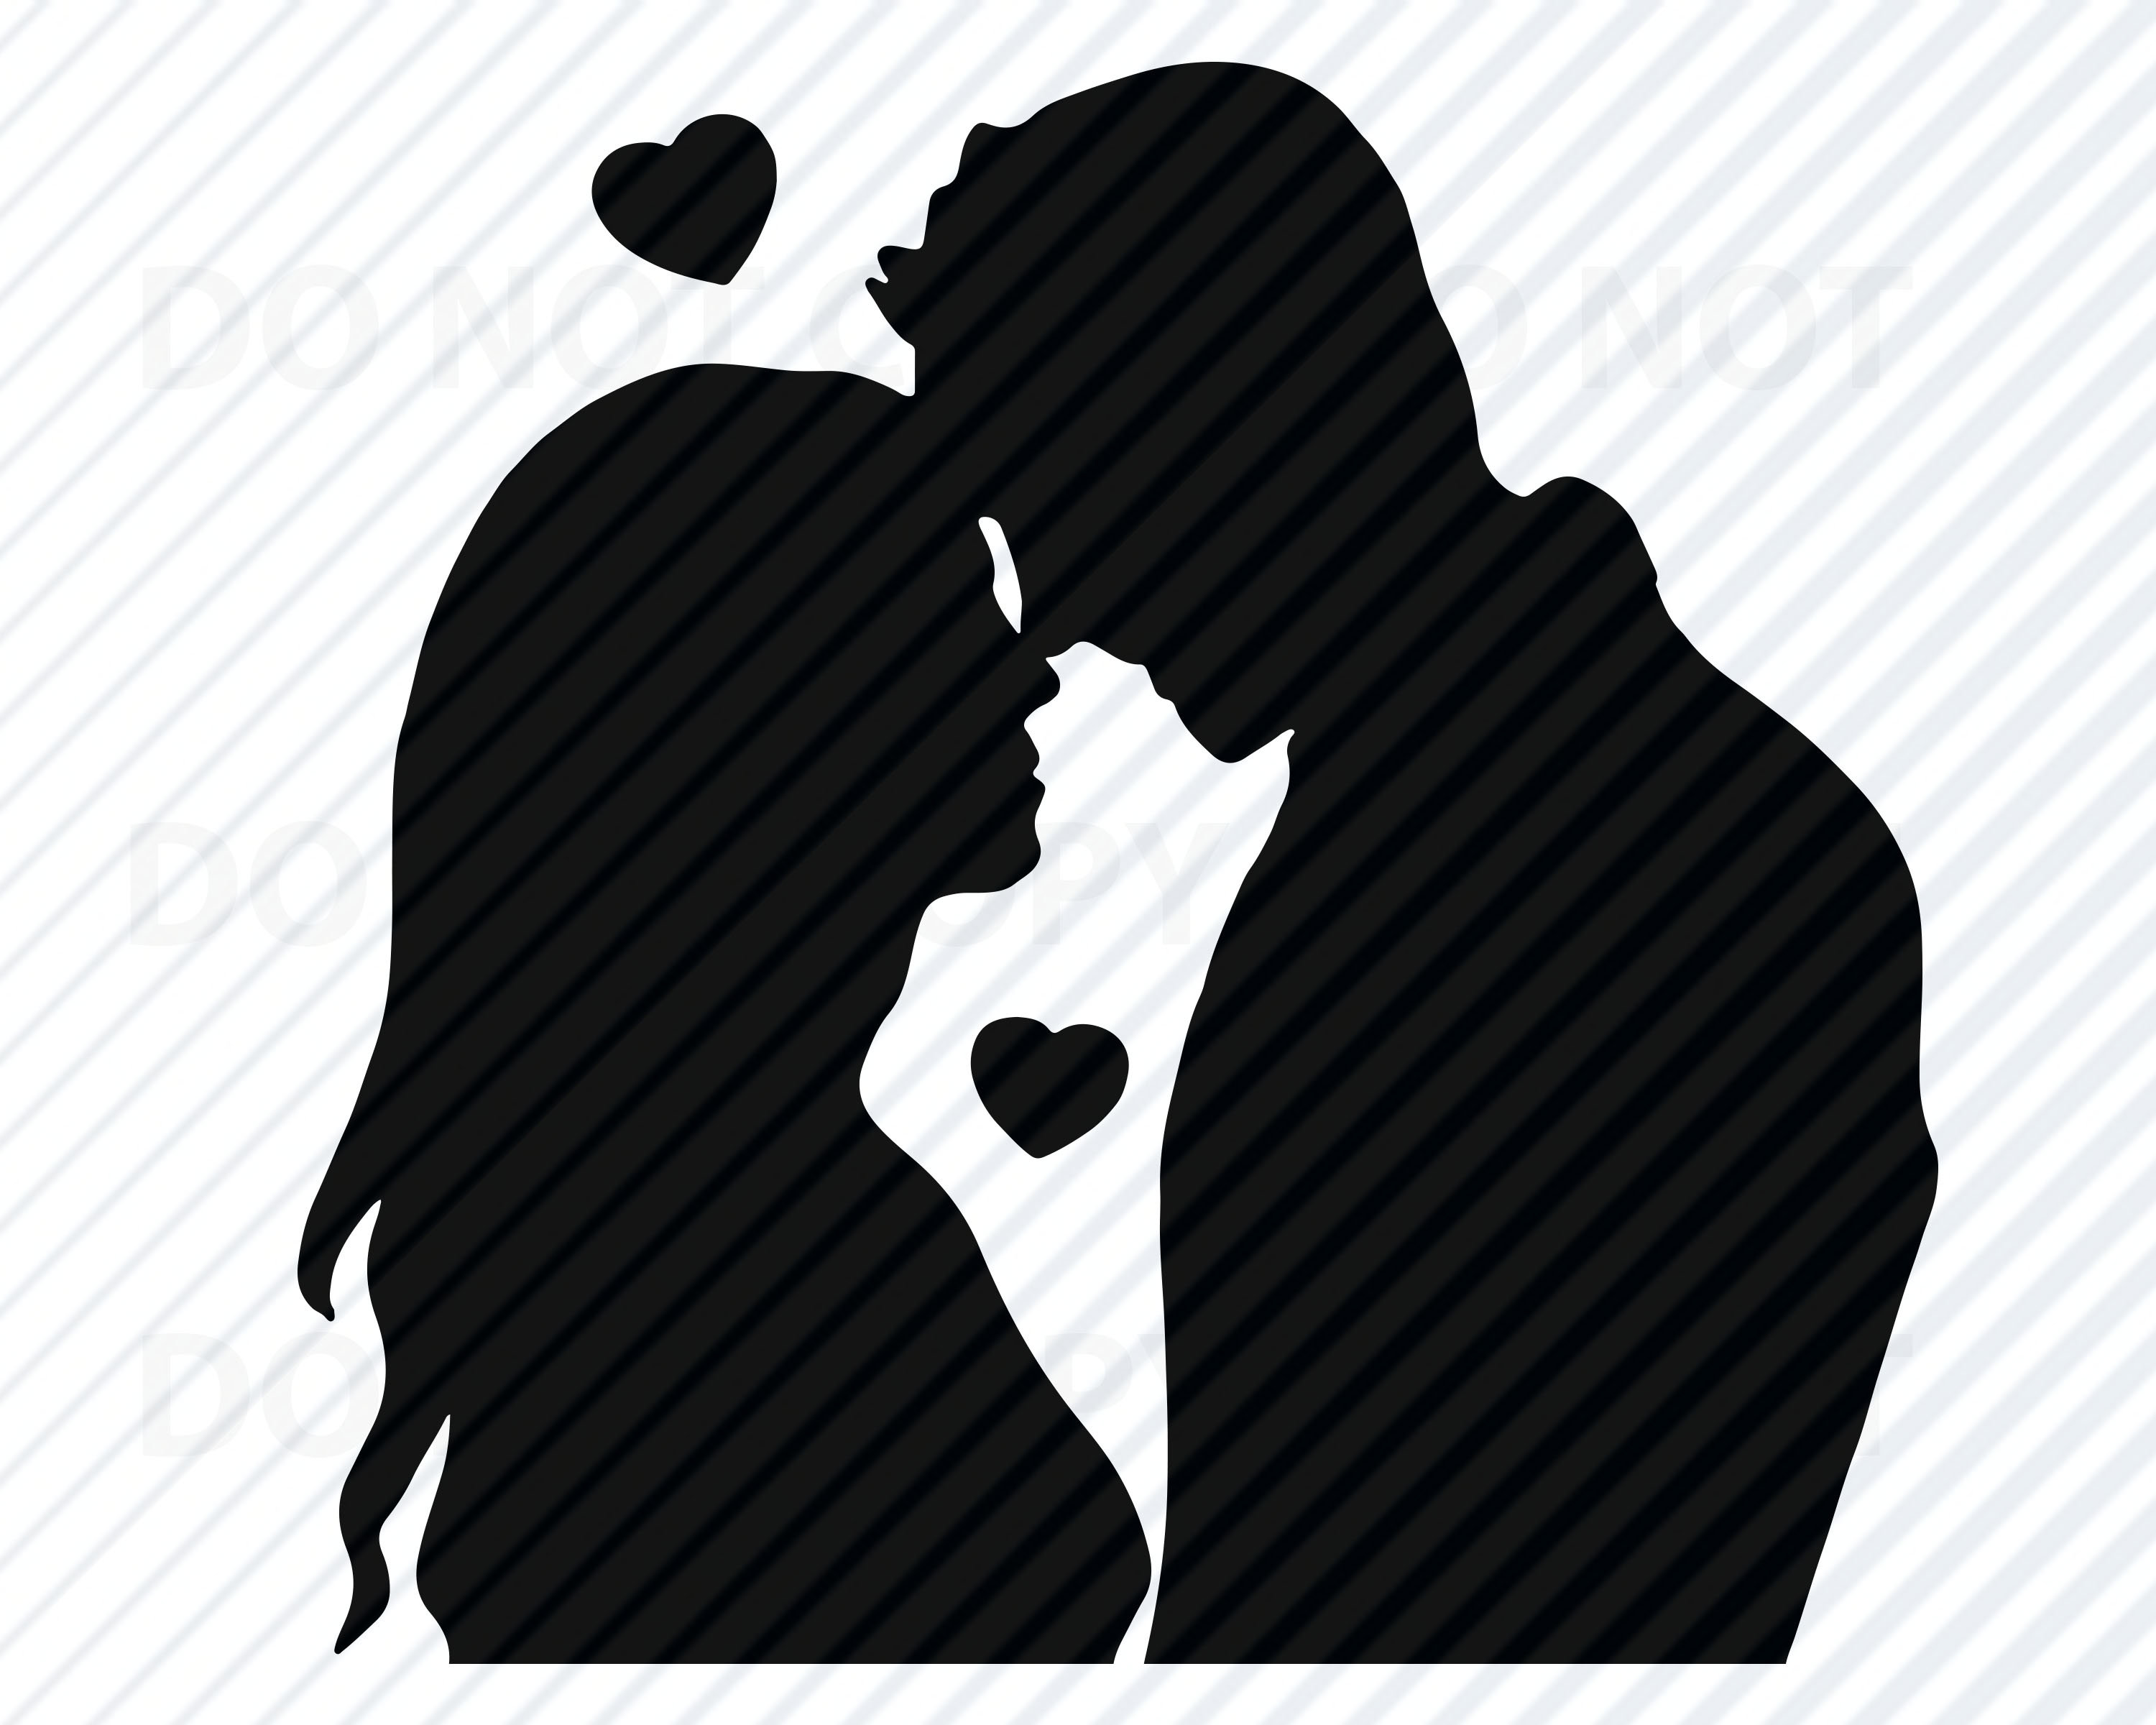 People Silhouette SVG - Woman man Vector Images Clip Art Love SVG Files For...